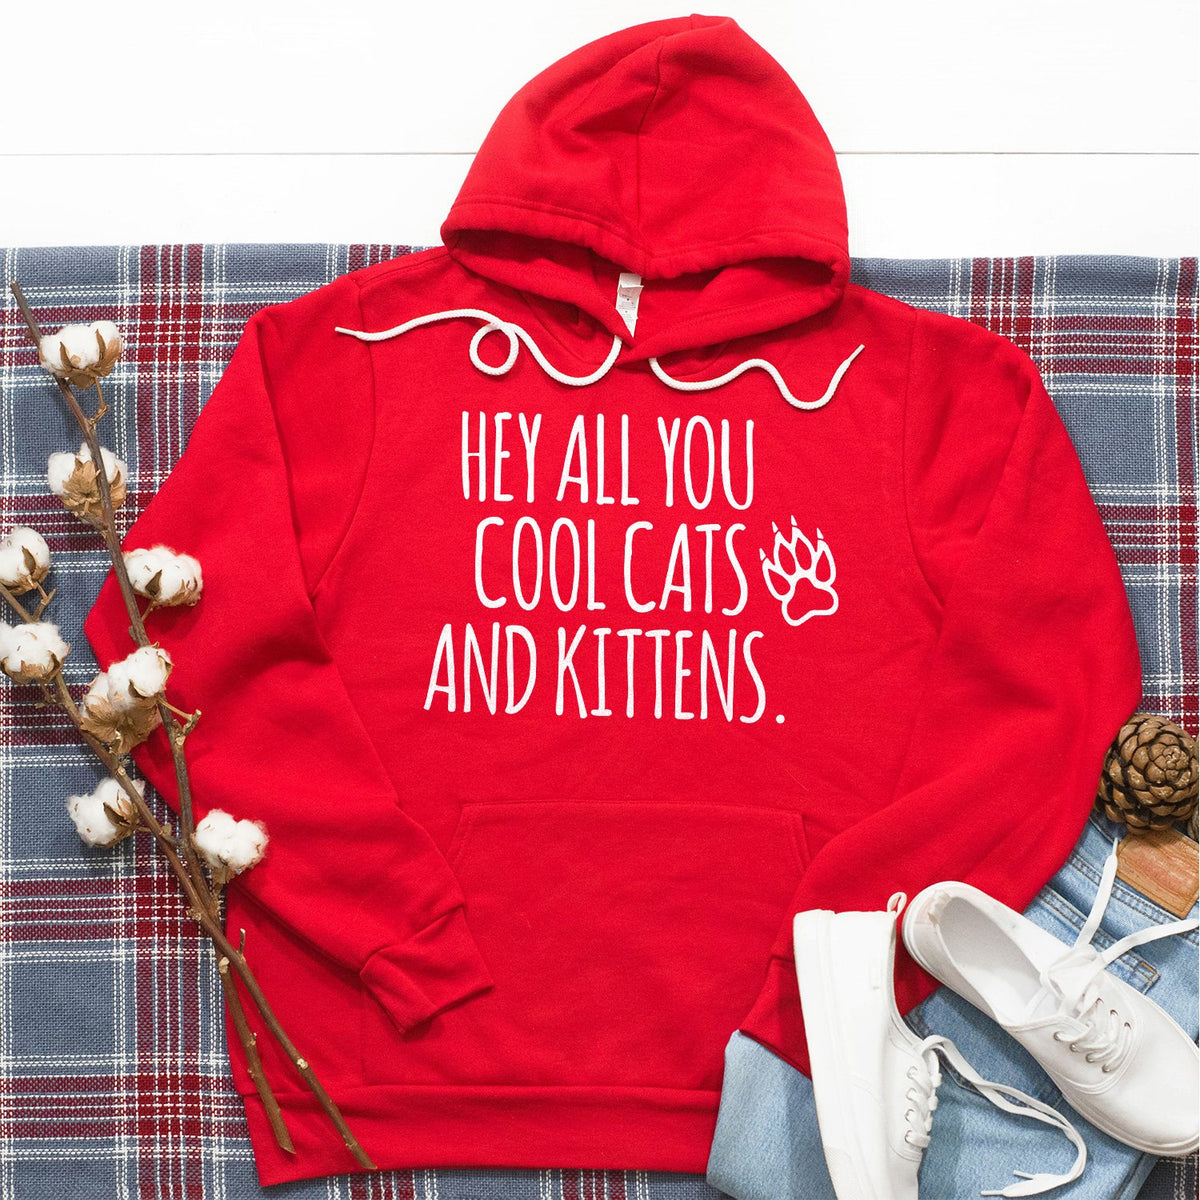 Hey All You Cool Cats and Kittens - Hoodie Sweatshirt